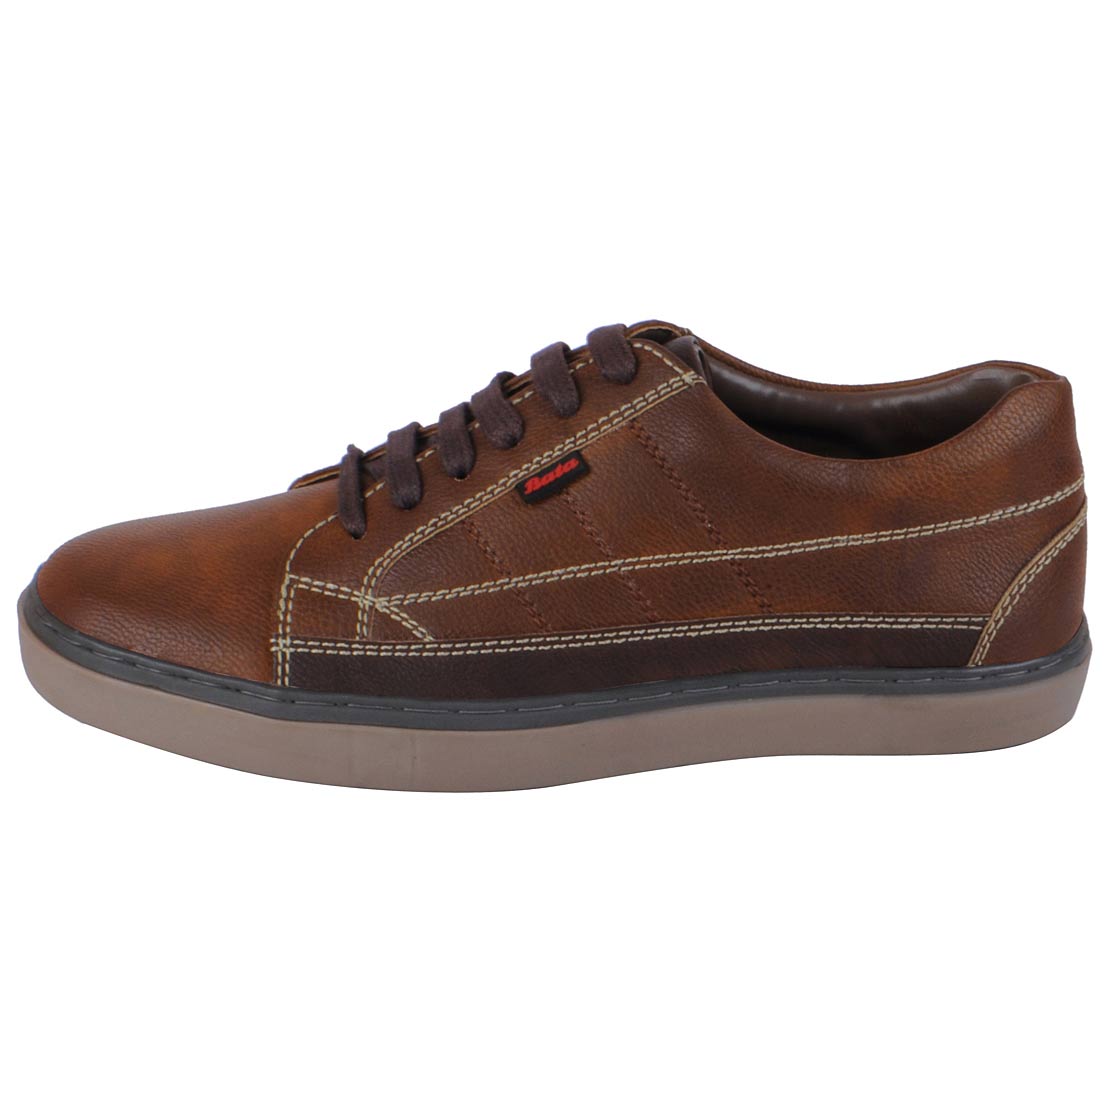 Buy Bata Men's Brown Sneakers Casual Shoes Online @ ₹1349 from ShopClues